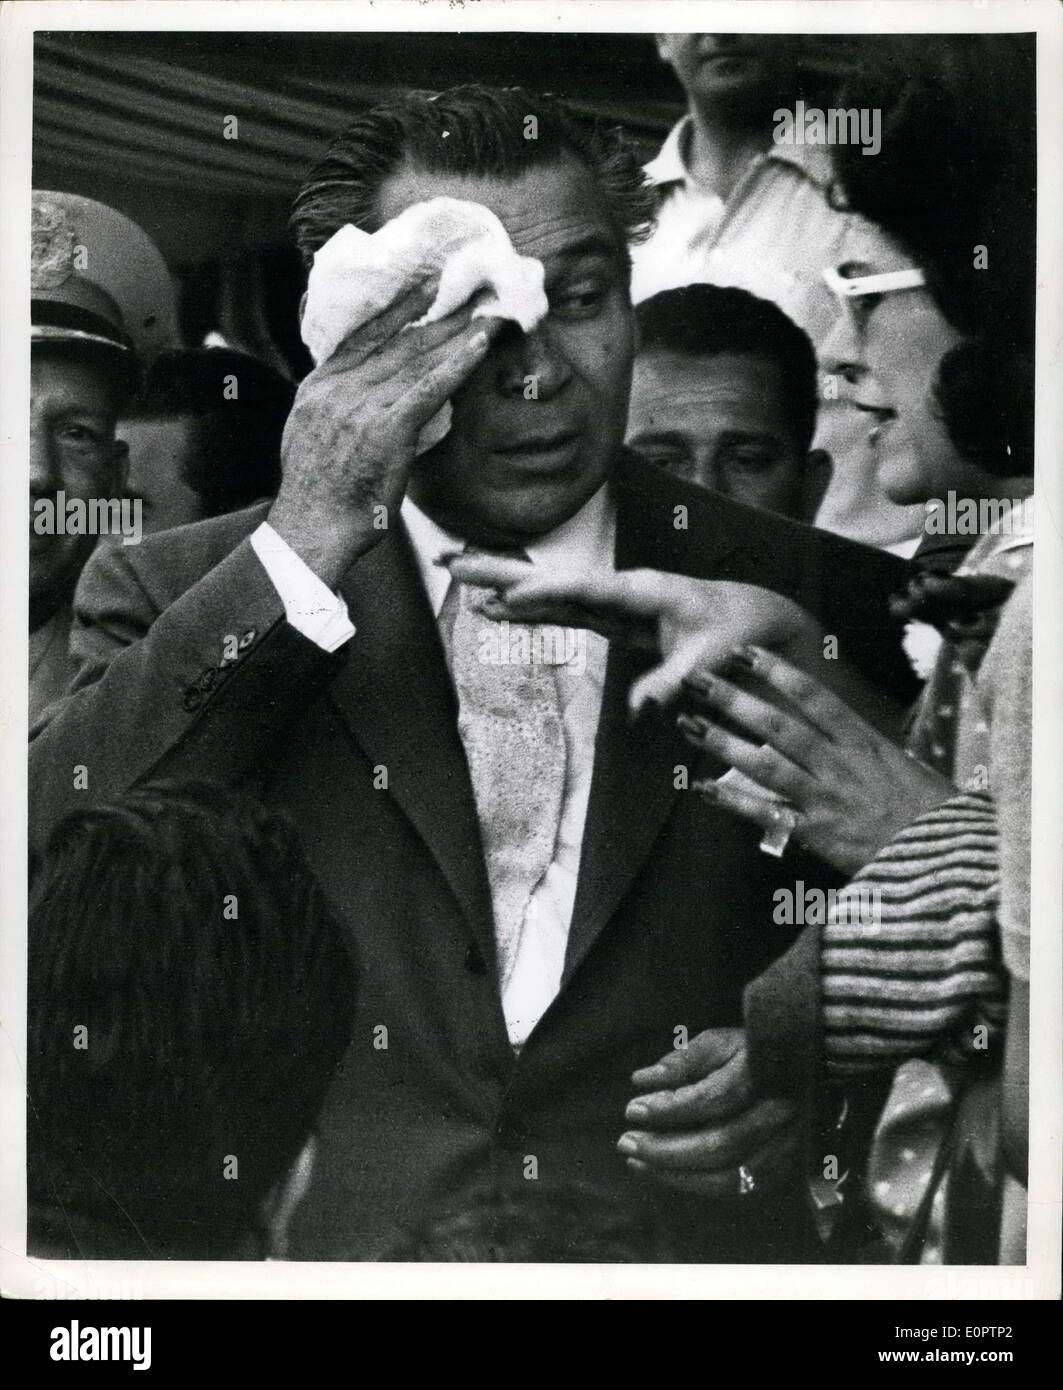 Feb. 25, 1957 - Generalissimo Fulgenic Batista at the Cuabn Grand Prix car race. Despite the interesting event the dictator seems to be worried and constantly perspiring. The Question is obvious? What to regain their freedom in this central American dictatorship. Stock Photo